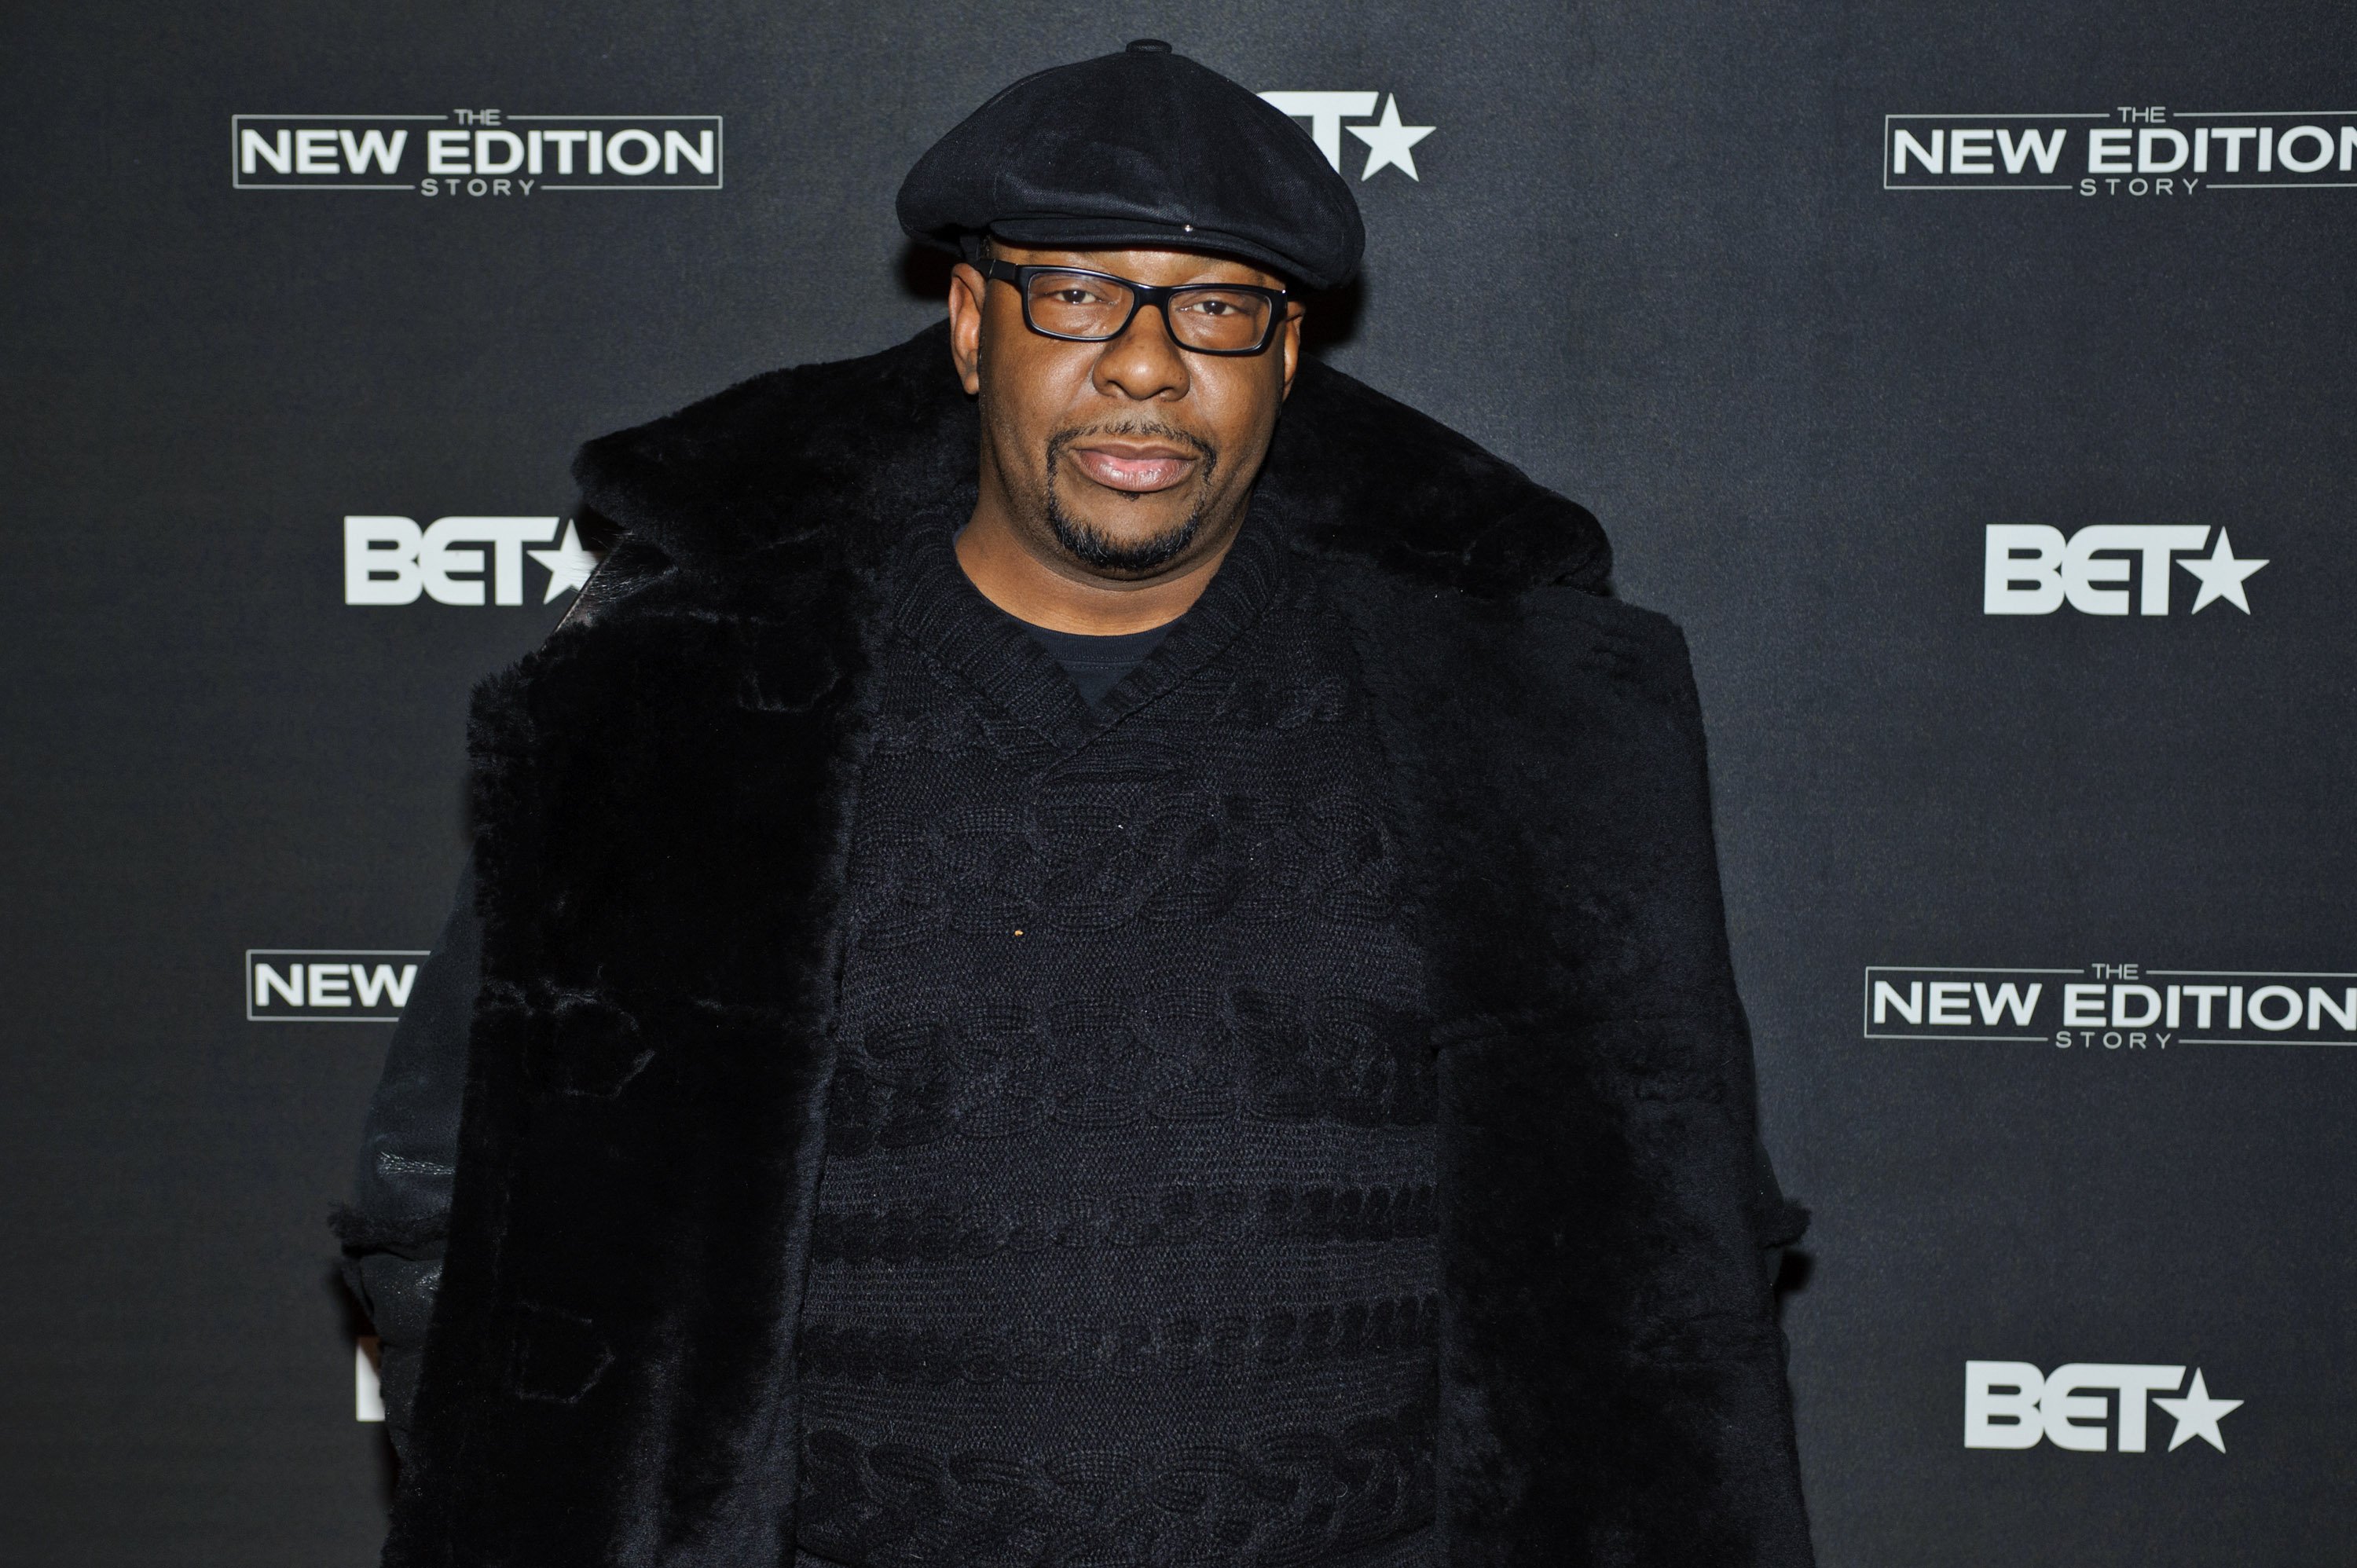 Bobby Brown attends BET's screening of The New Edition Story on Jan. 3, 2017 in Chicago, Illinois | Photo: Getty Images